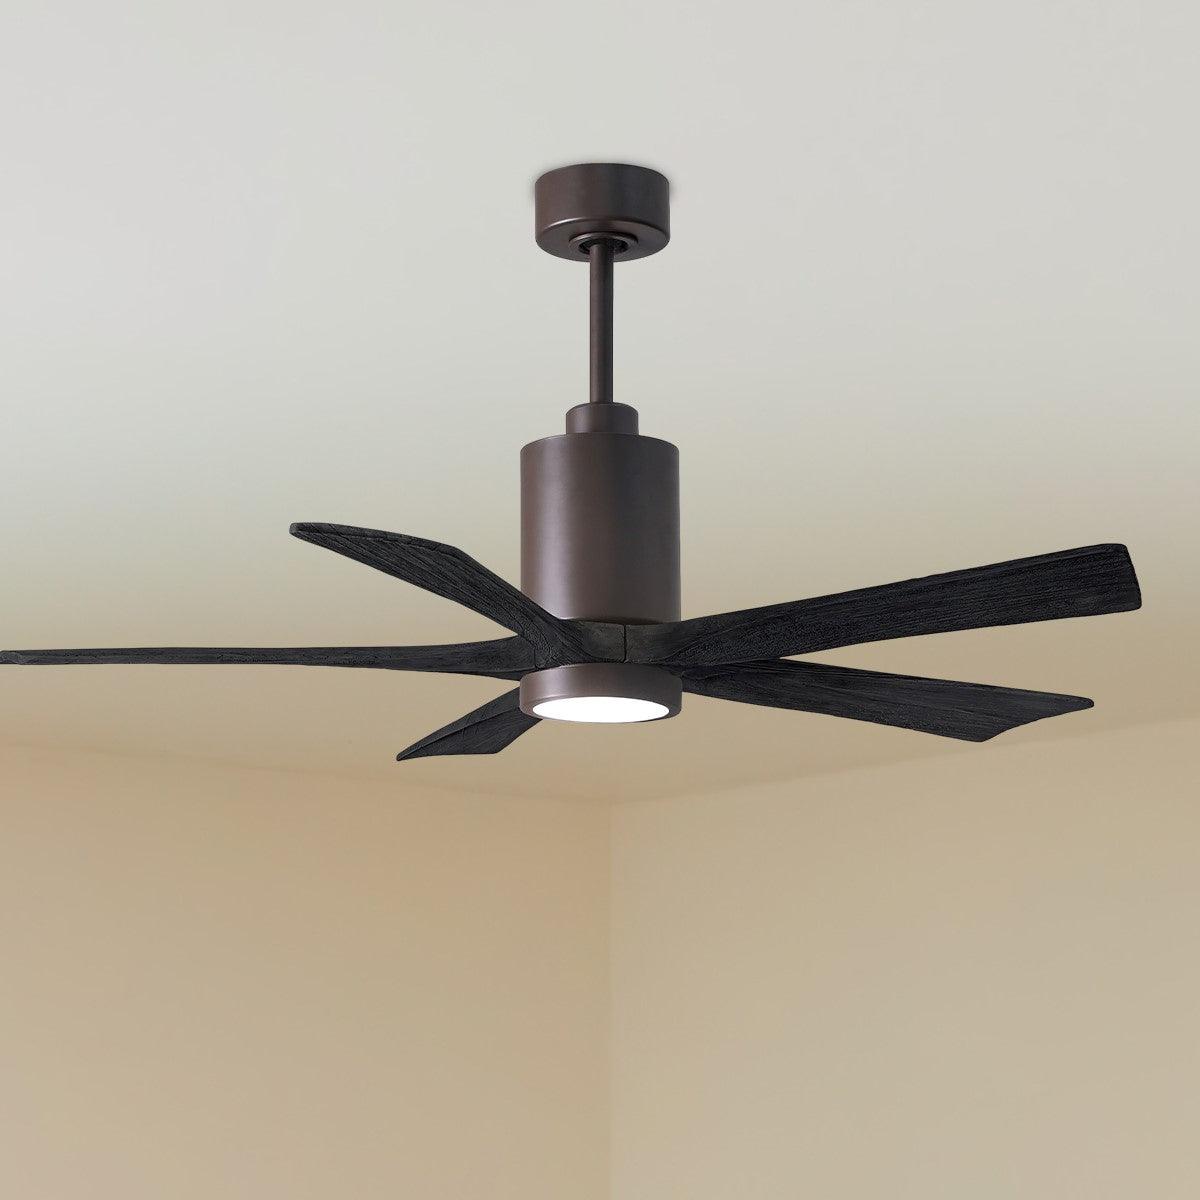 Patricia 52 Inch 5 Blades Modern Outdoor Ceiling Fan With Light, Wall And Remote Control Included